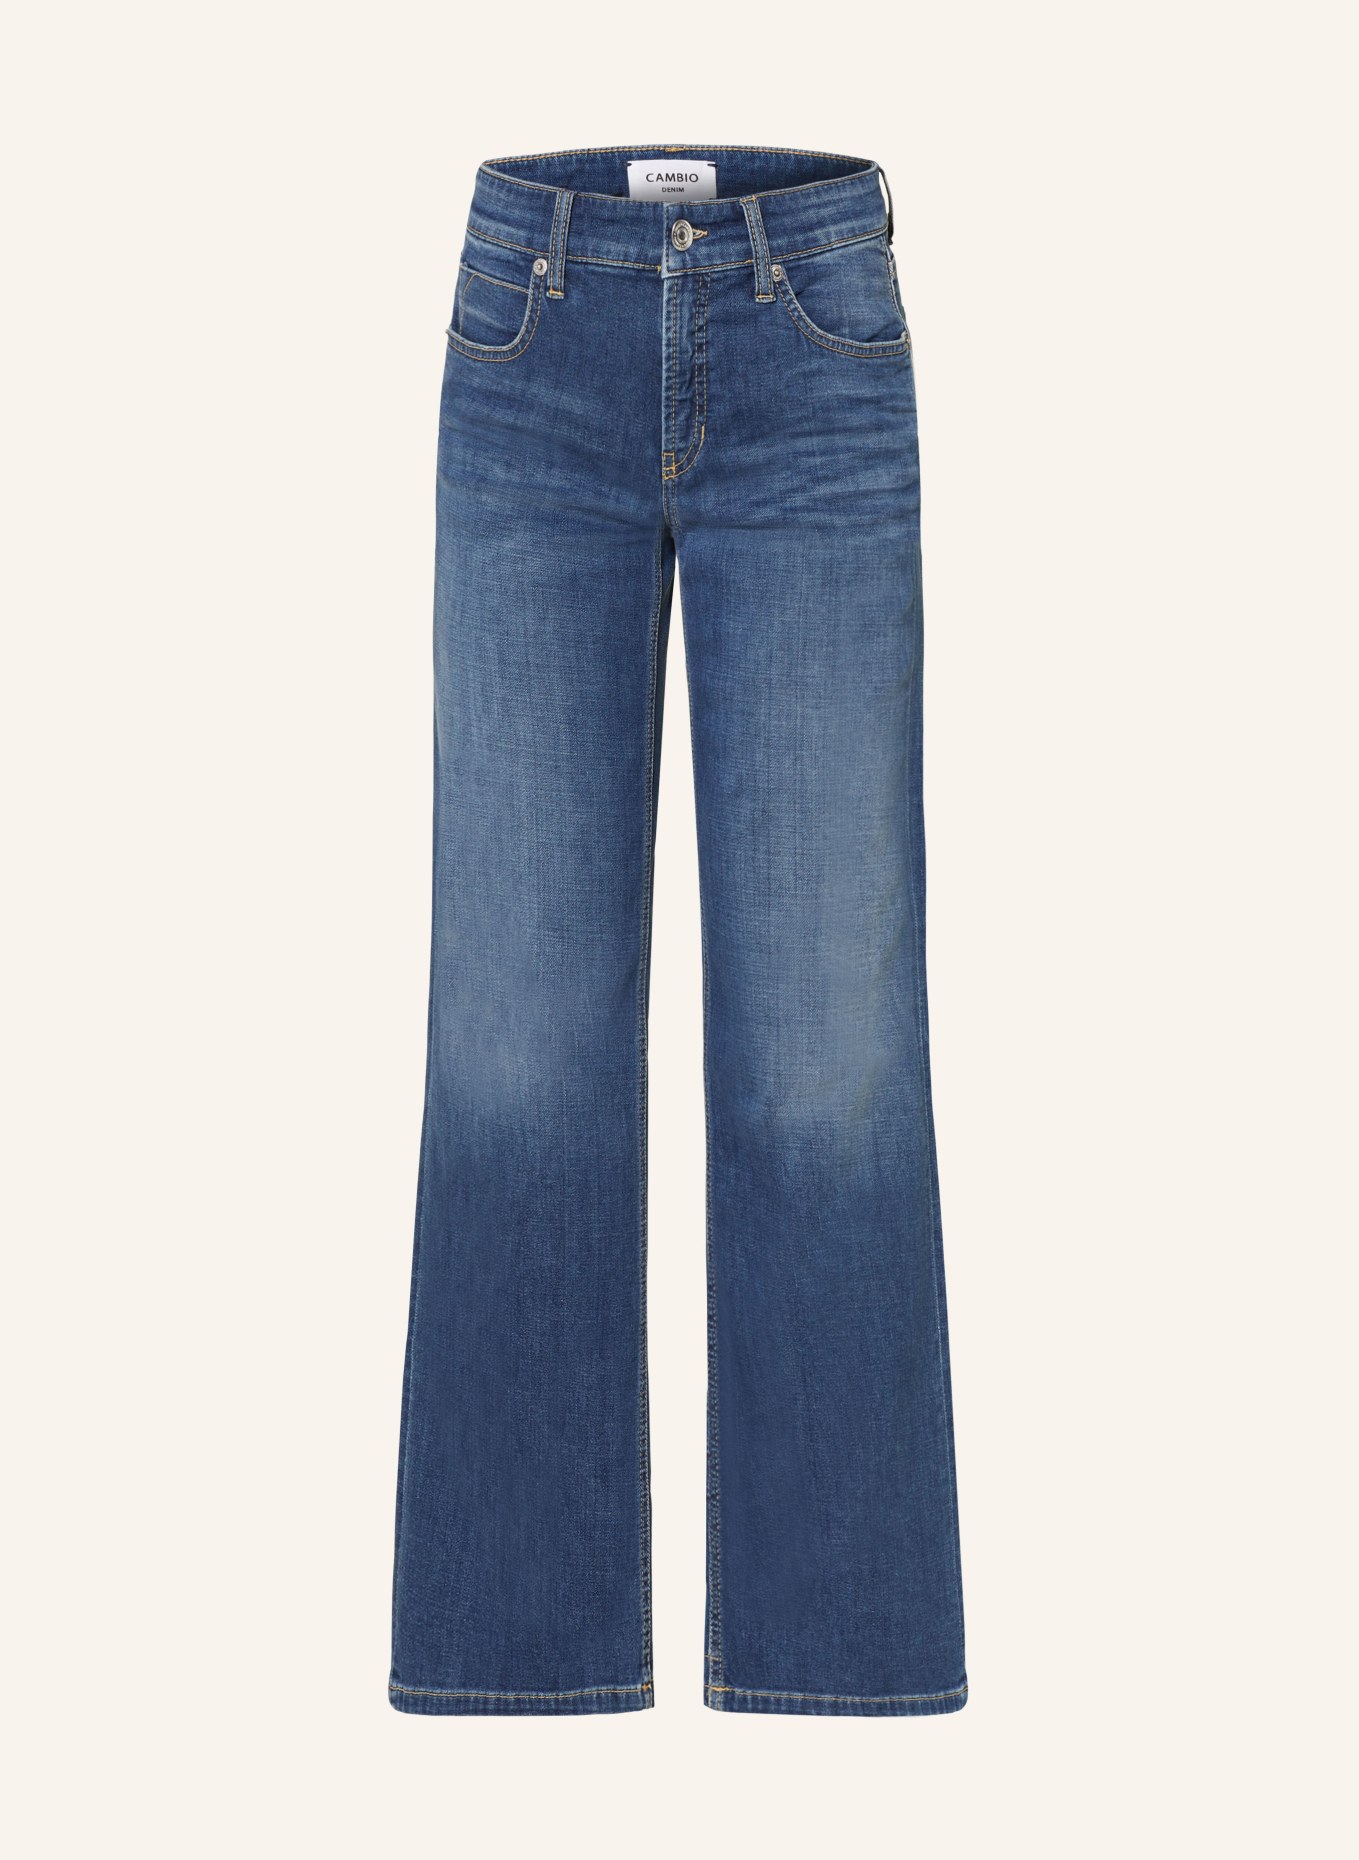 CAMBIO Flared jeans TESS, Color: 5035 summer dark used (Image 1)